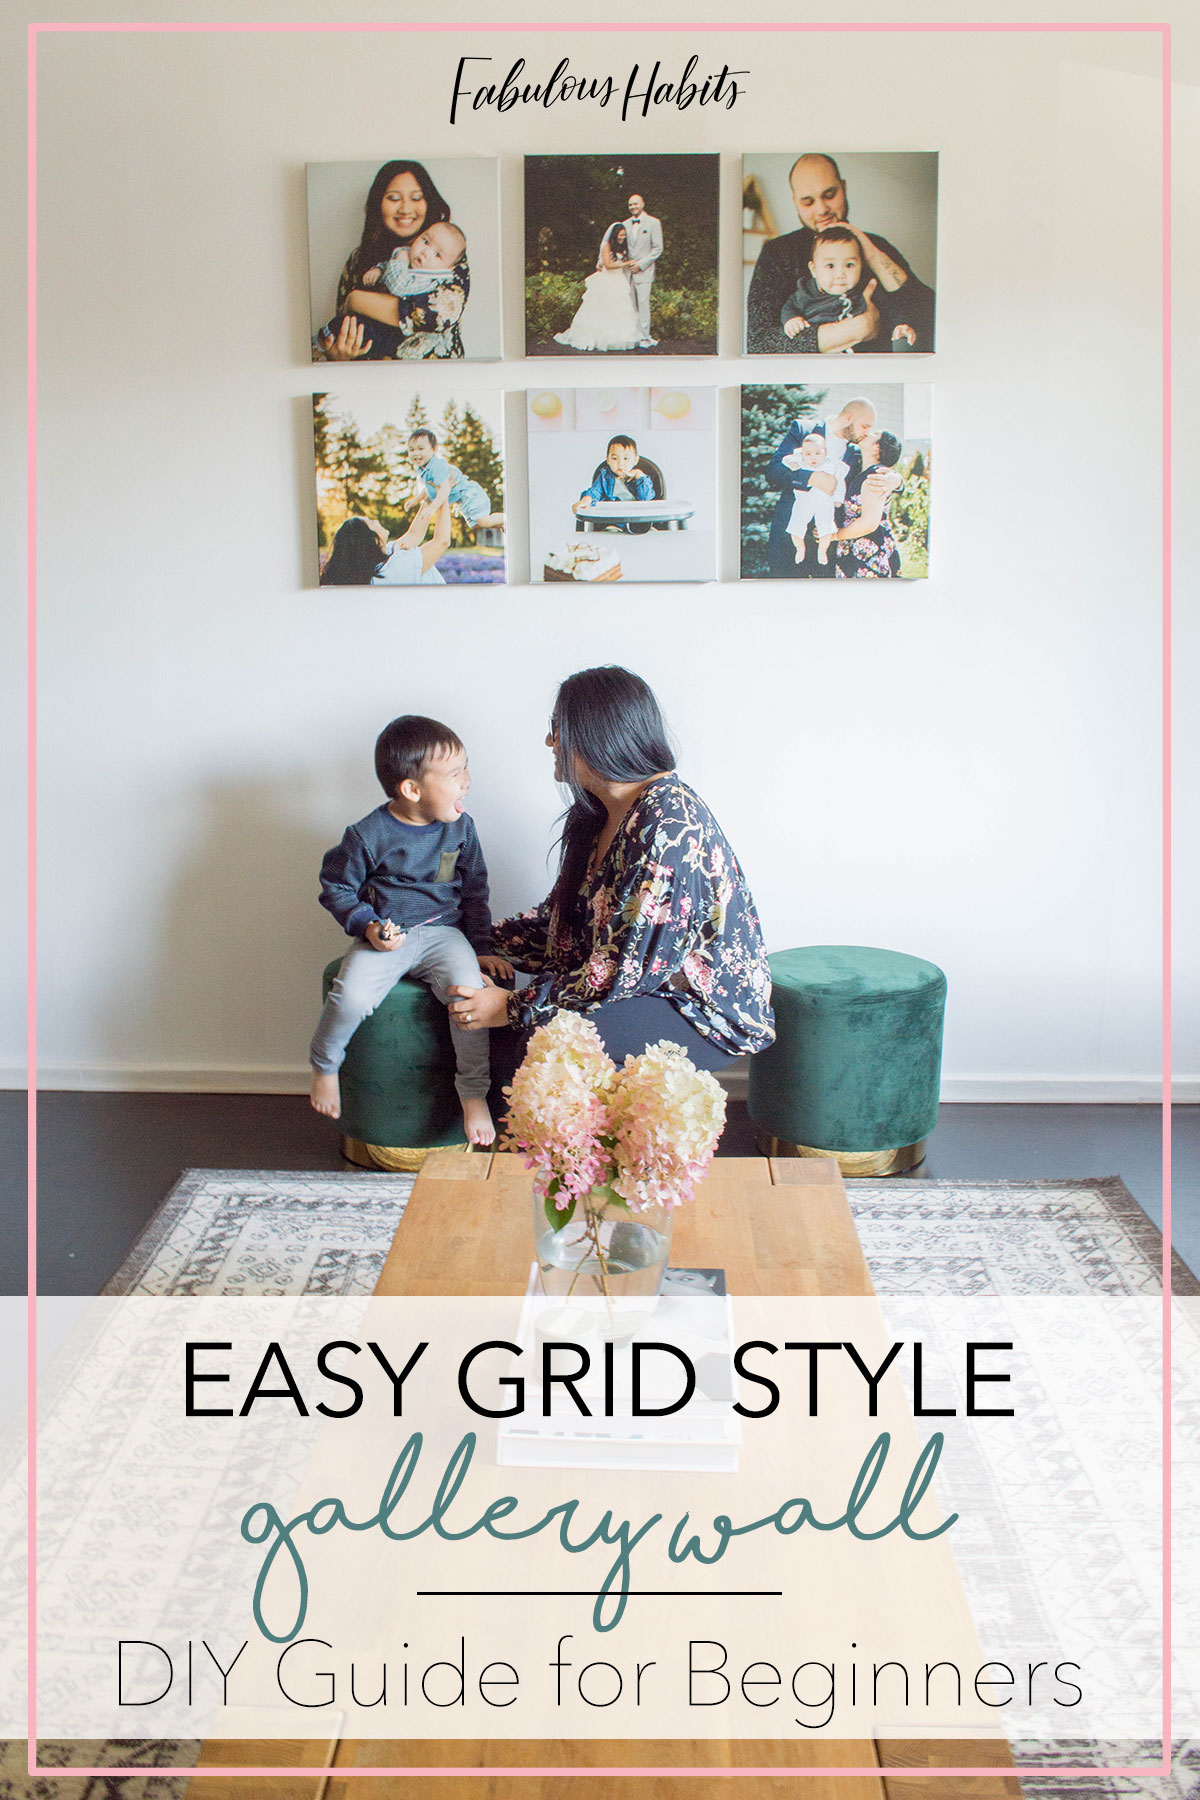 Impress your guests with the easiest gallery wall layout: grid style! My DIY guide will help any beginner DIYer. Come join me for some decorating fun! #gallerywall #gallerywallideas